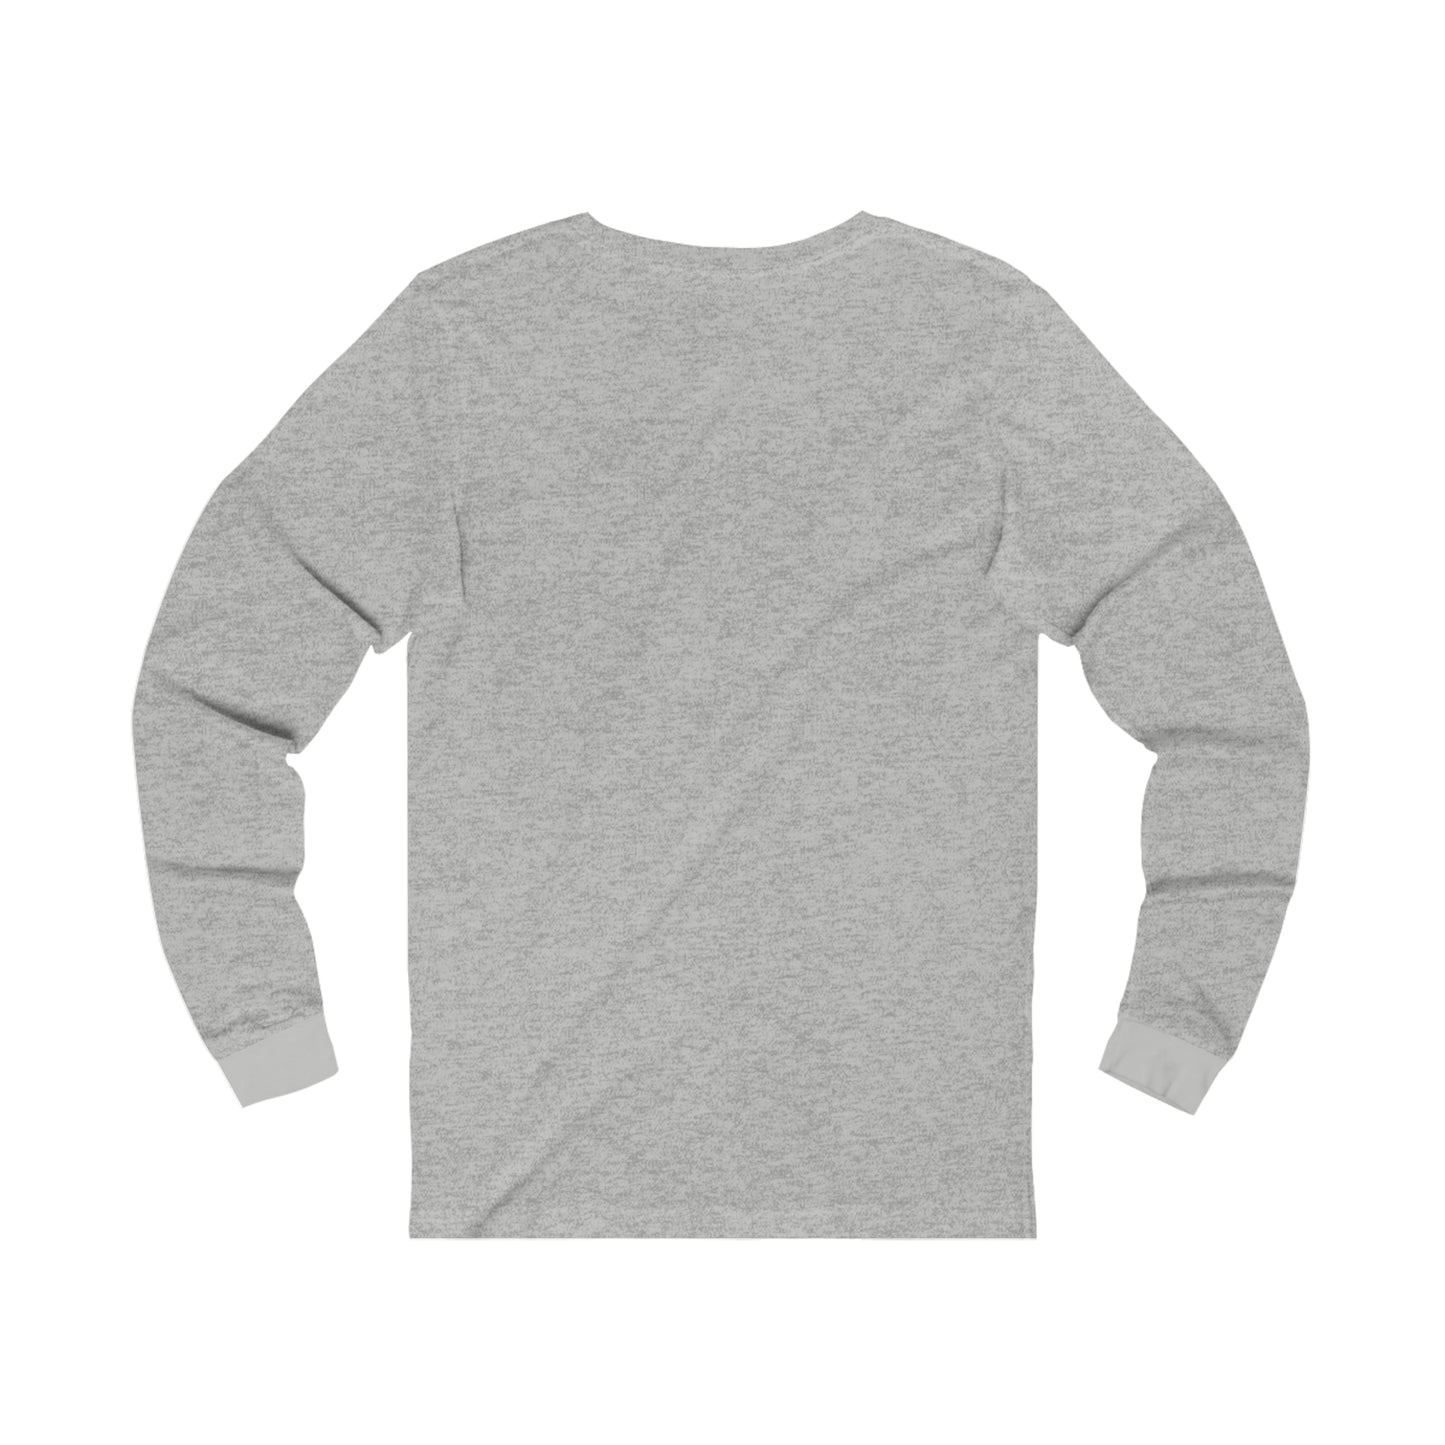 Cold Outside - Unisex Jersey Long Sleeve Tee